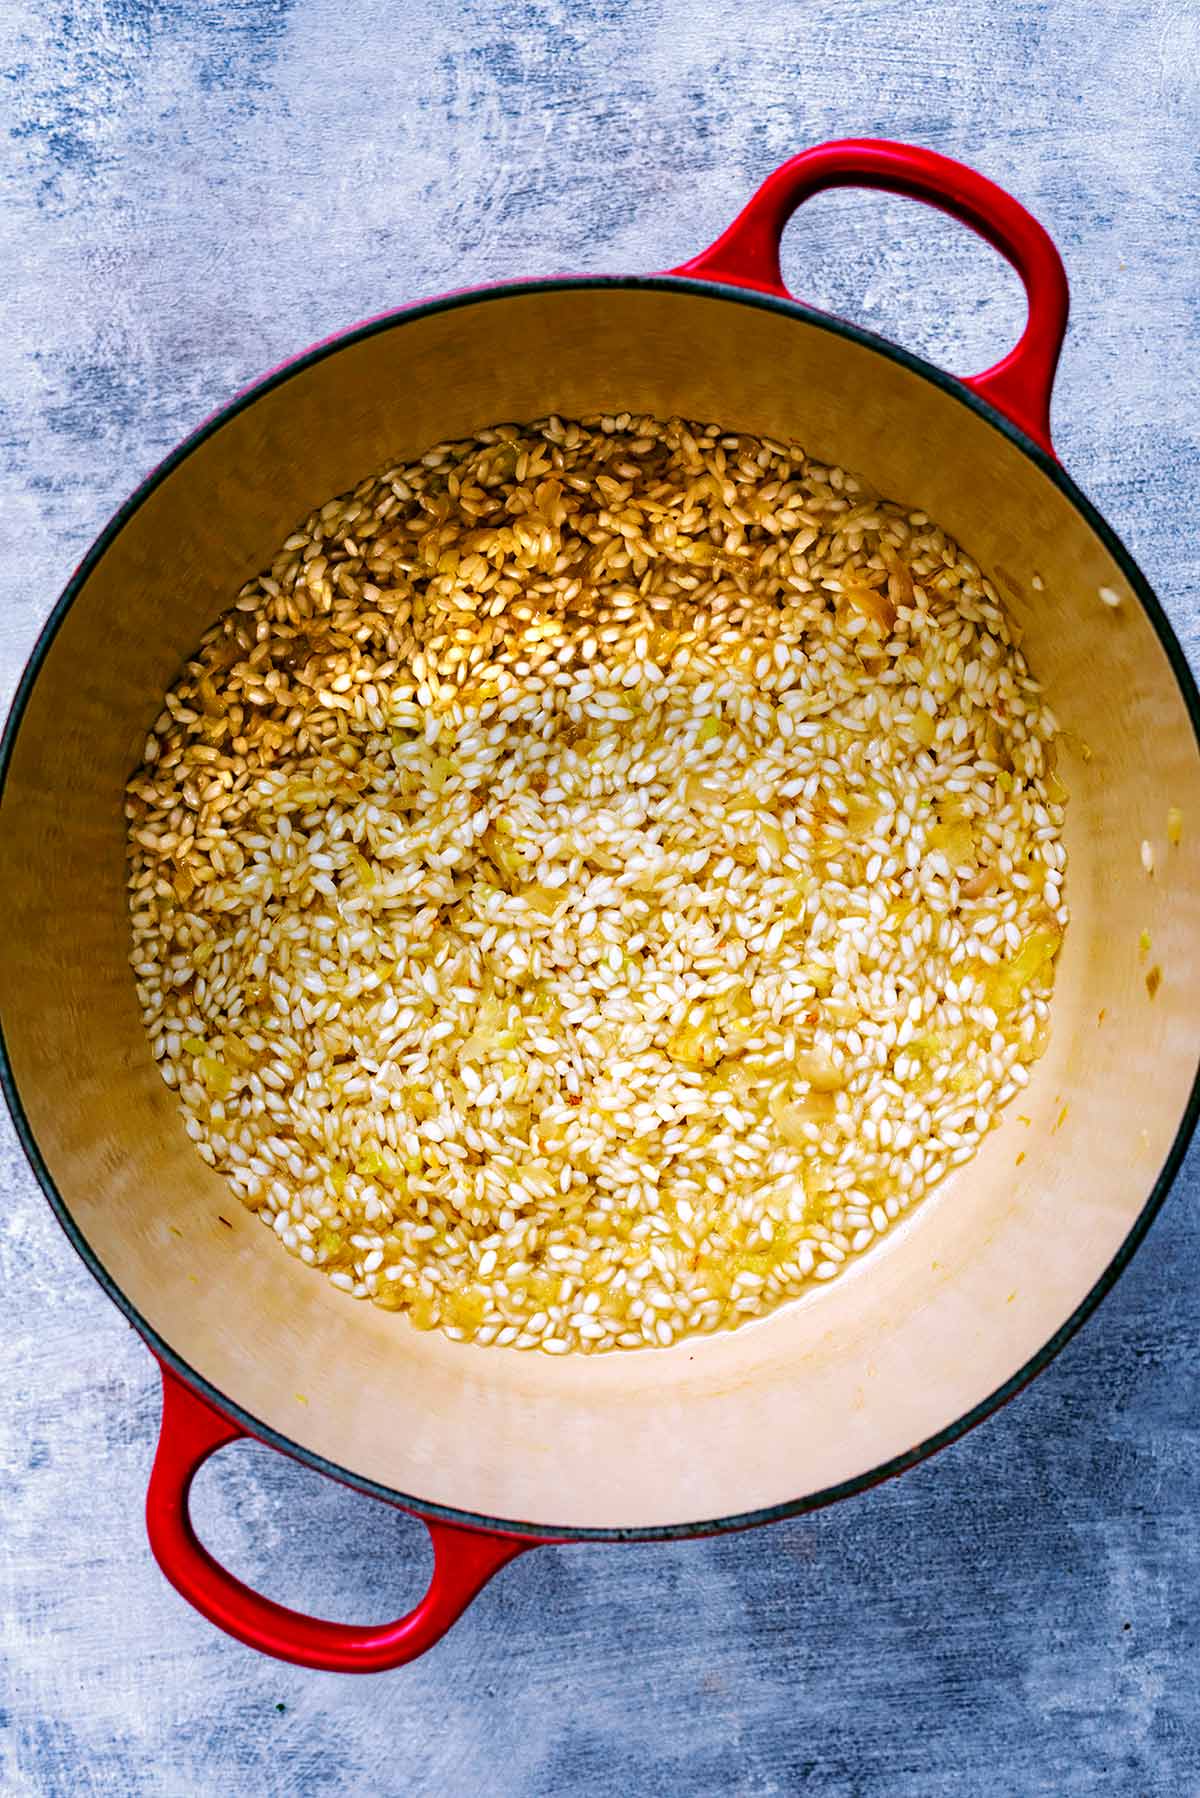 A large red pan containing risotto rice and white wine.